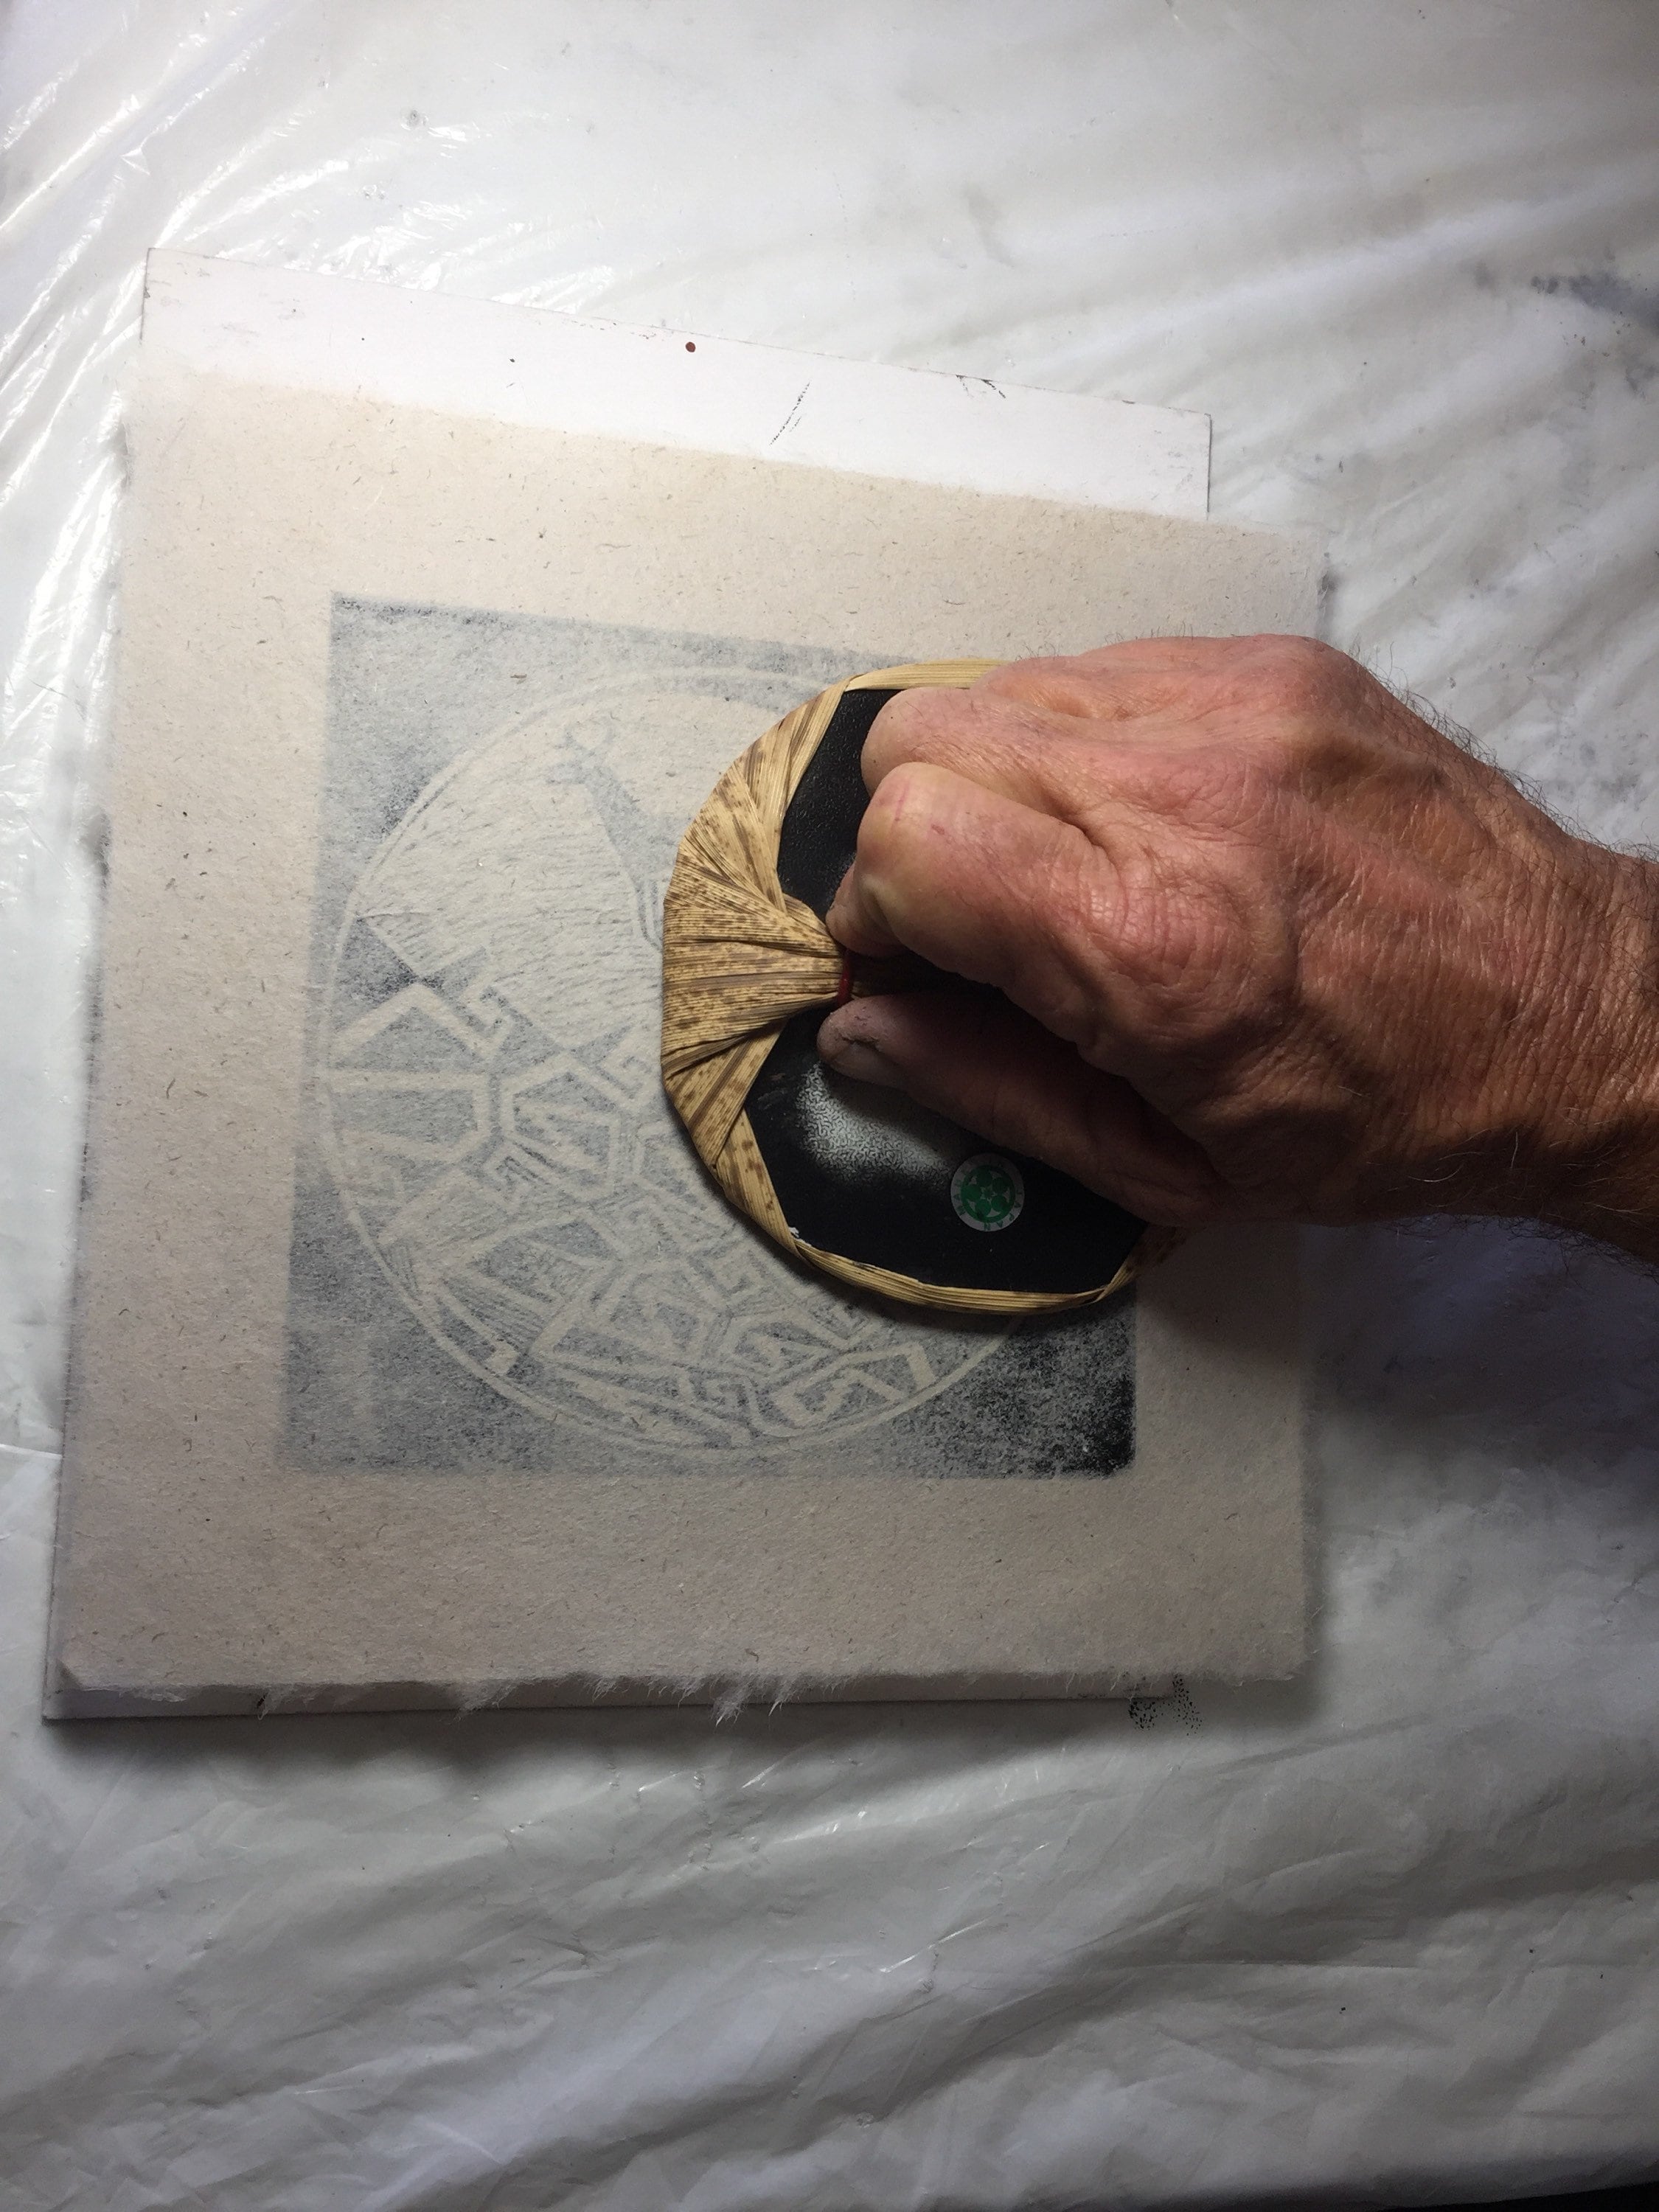 This is a block print of The Hand and Spiral on handmade paper by Michael Colombo and Barbara Barkley